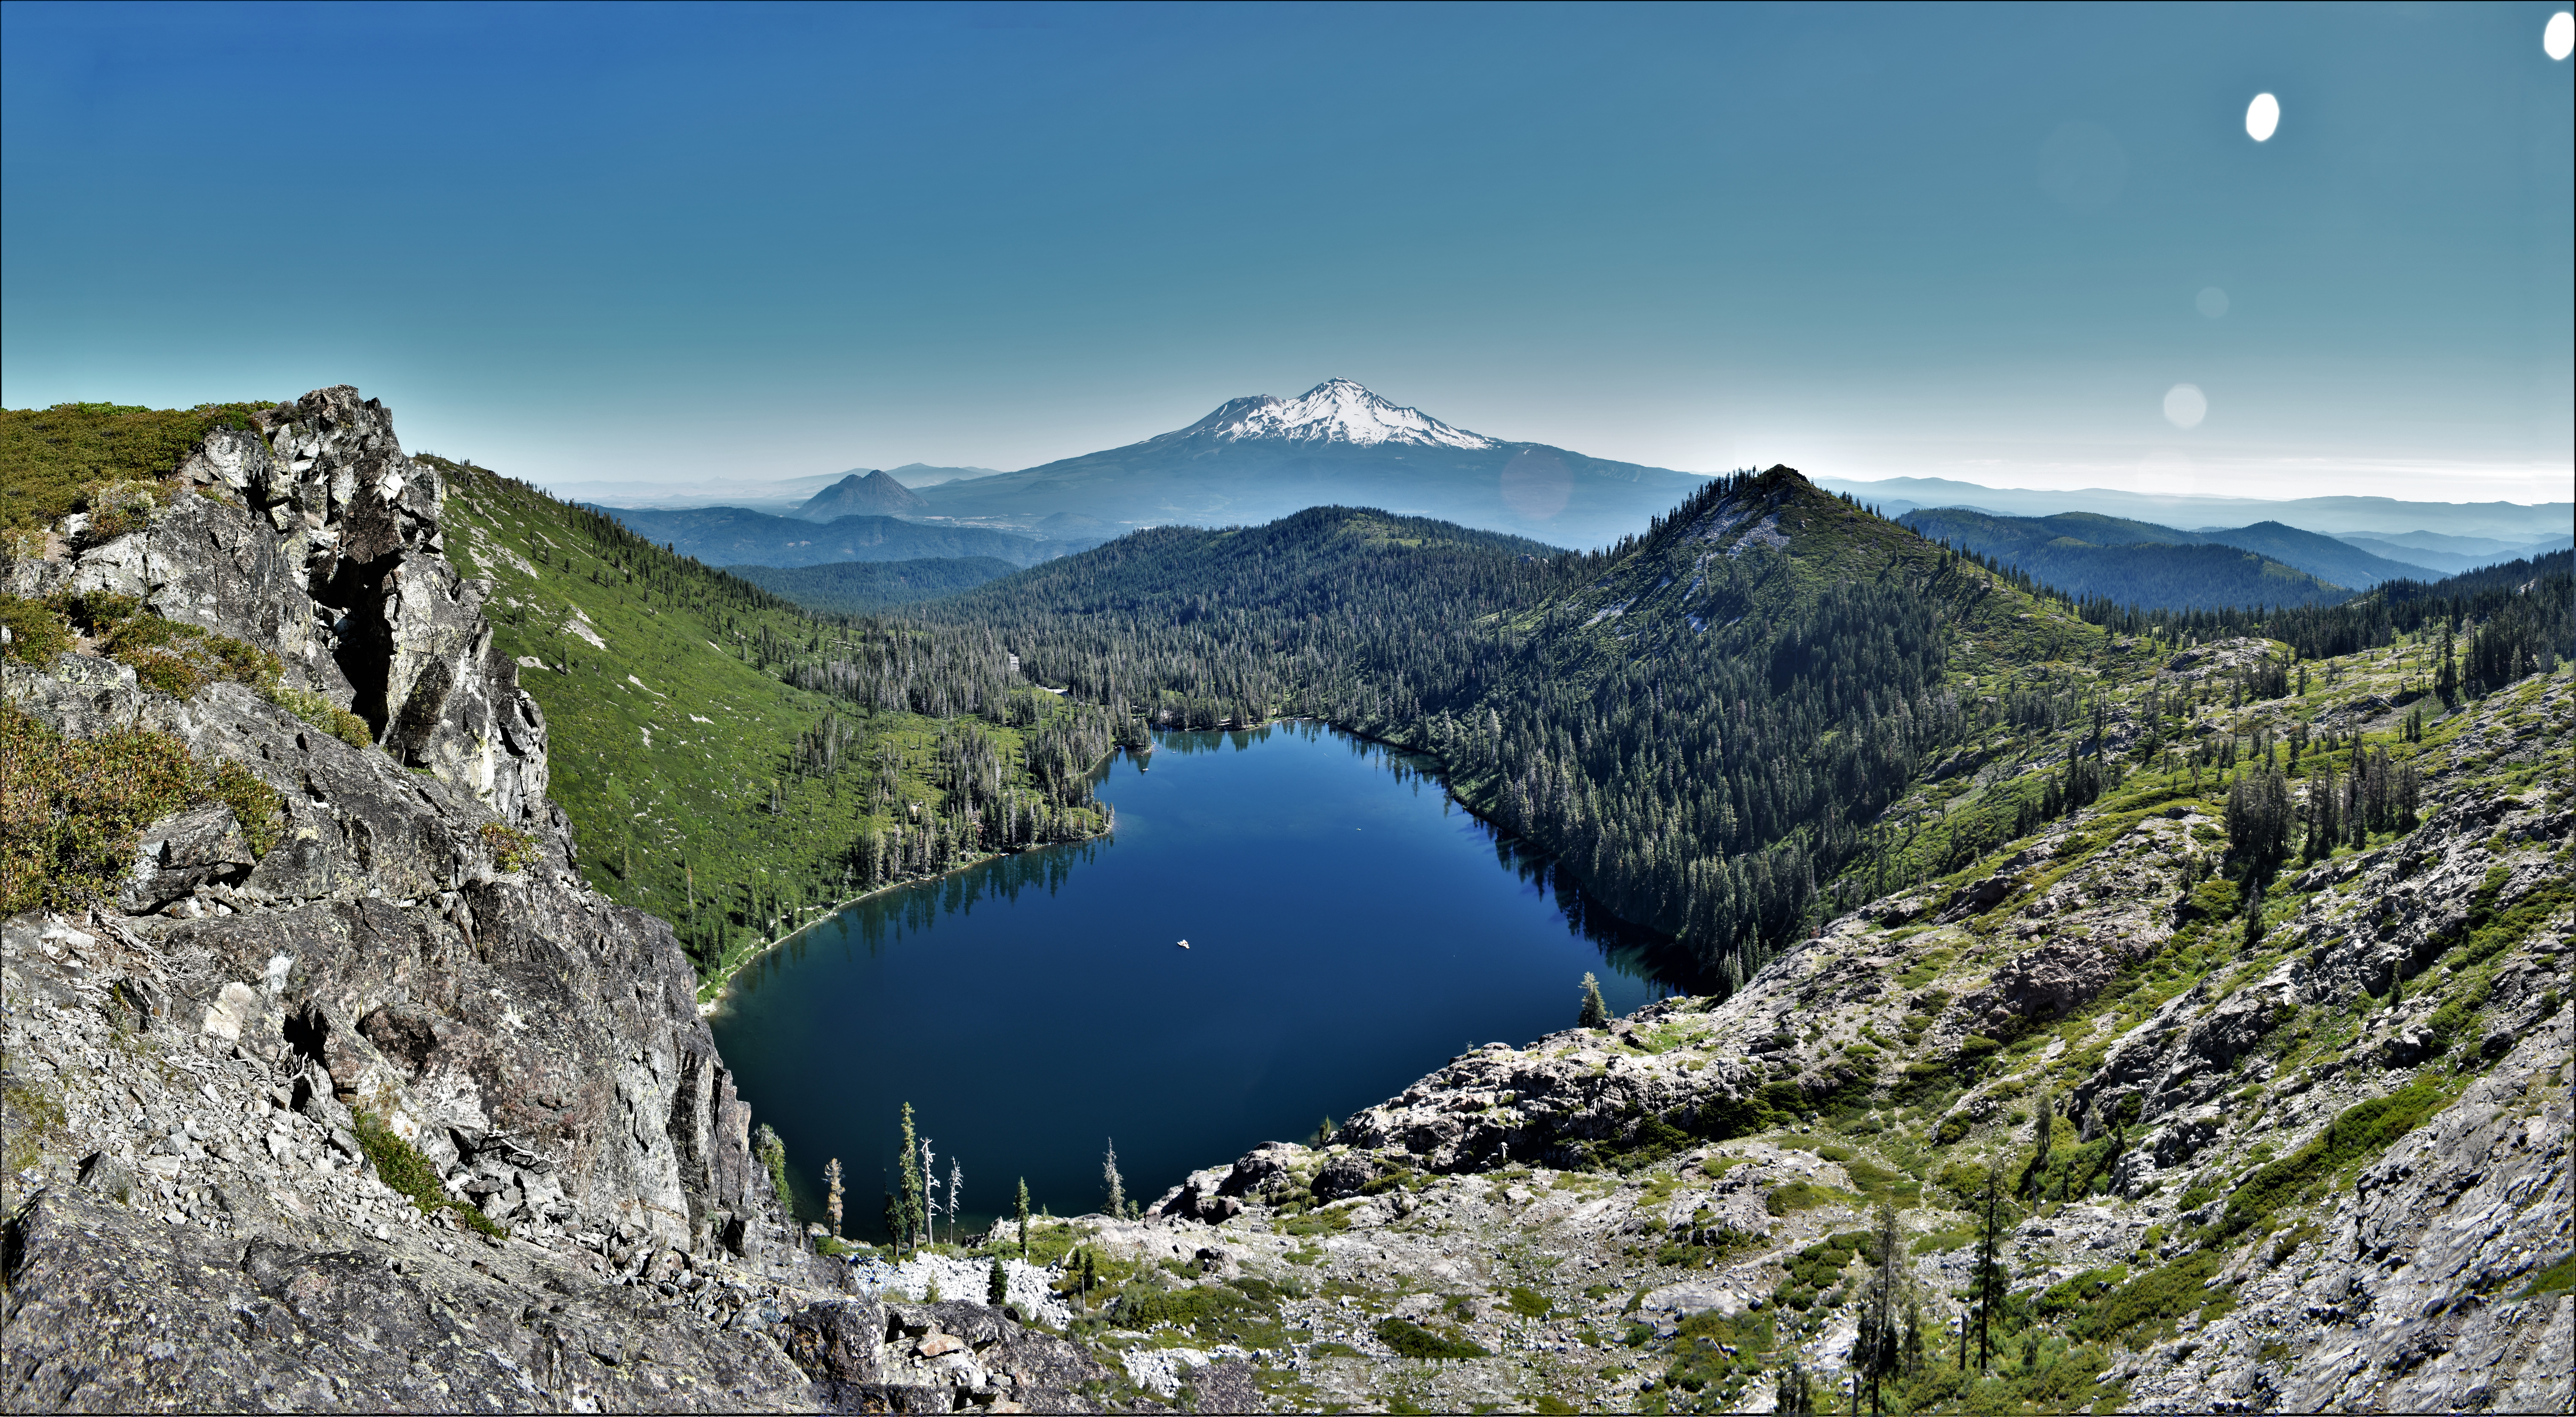 Mt. Shasta and Castle Lake